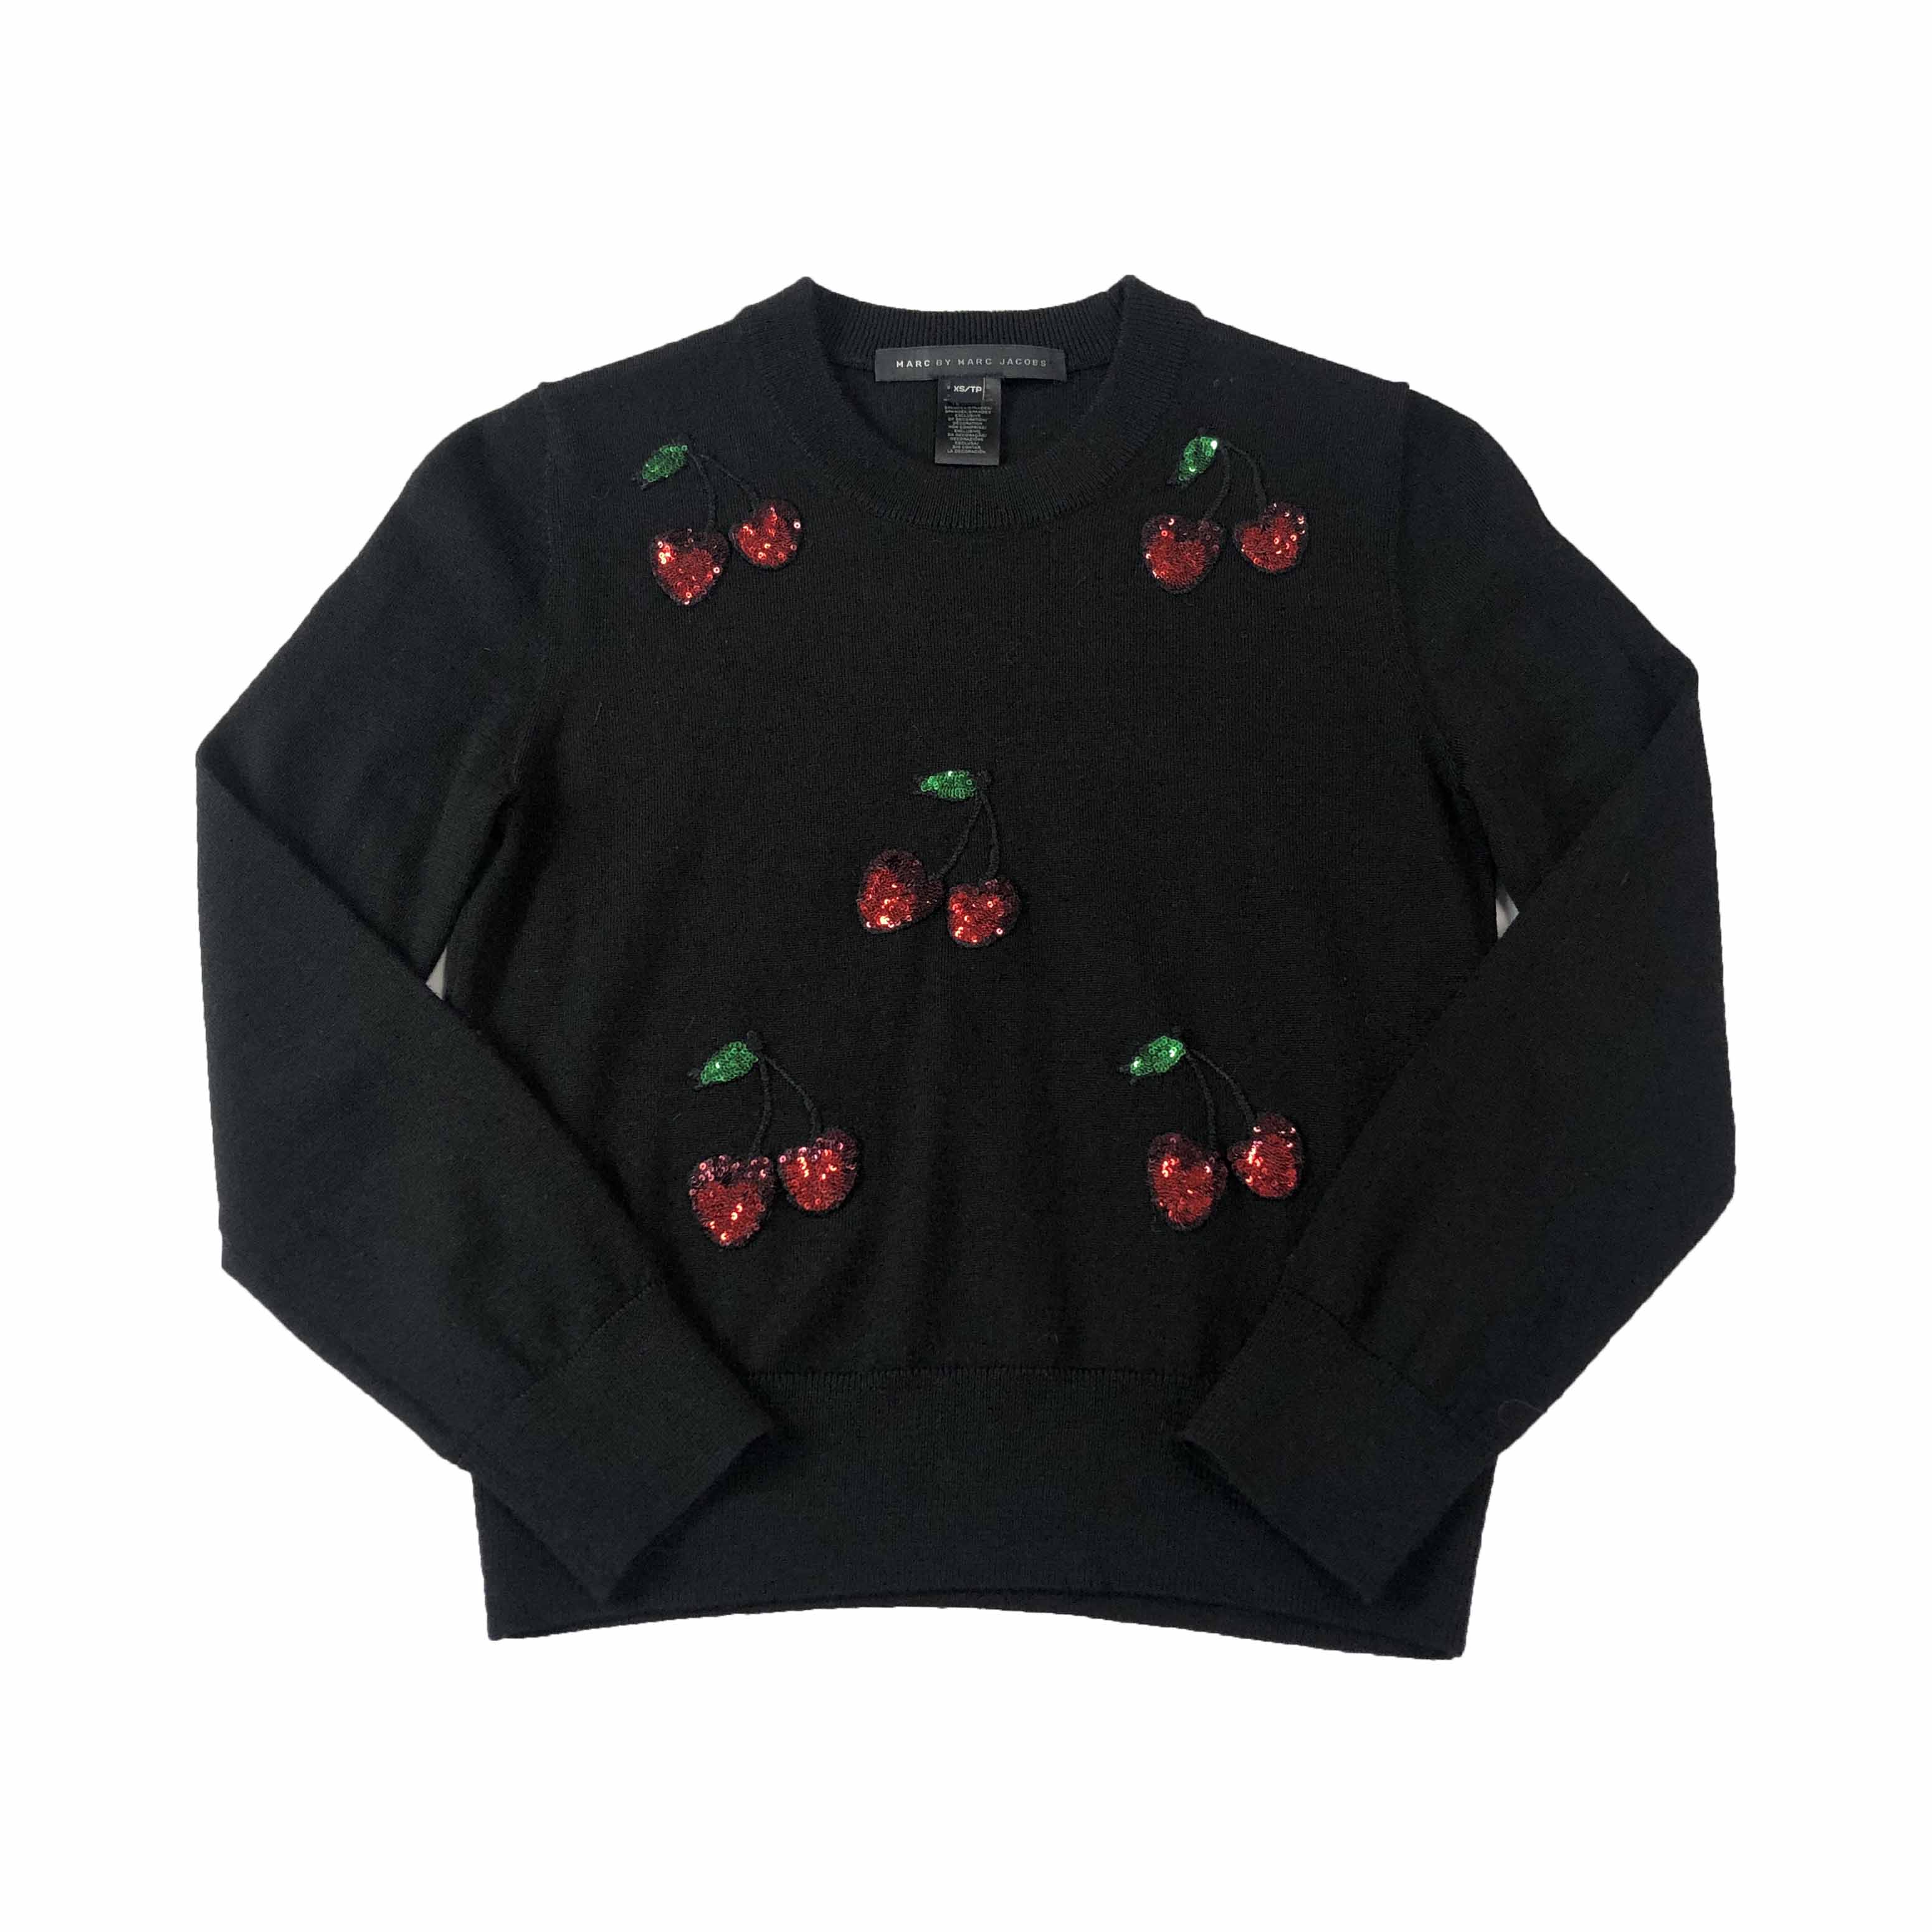 [Marc By Marc Jacobs] Cherry Spangle knit - Size XS